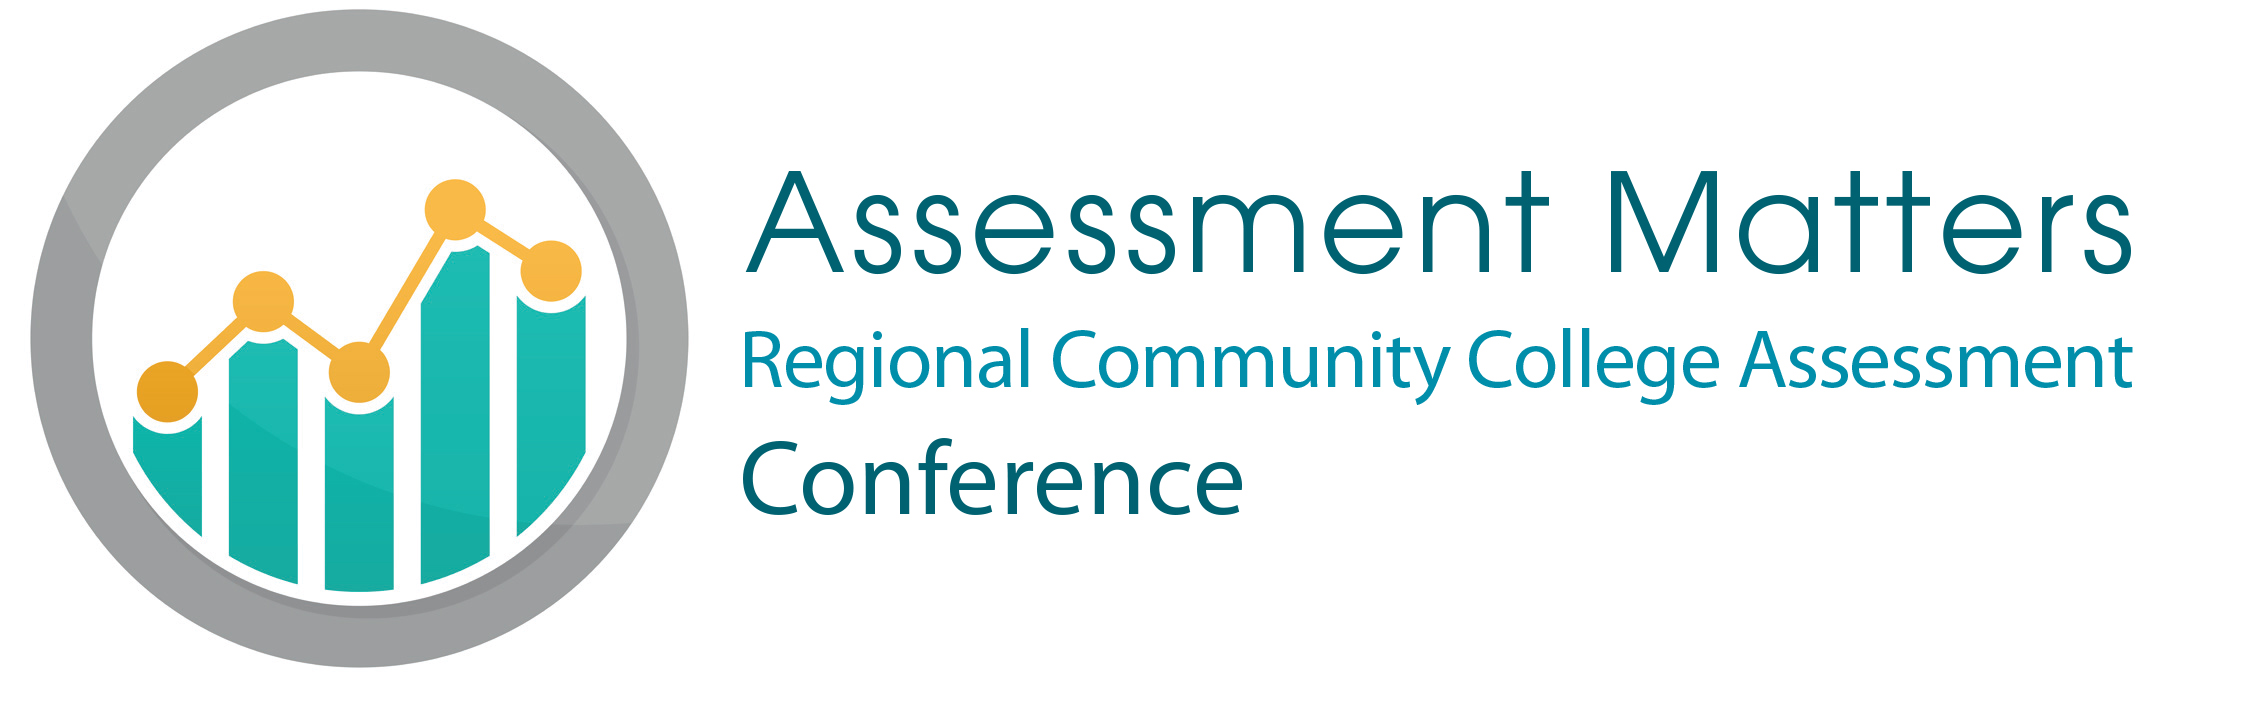 Assessment Matters: Regional Community College Assessment Conference